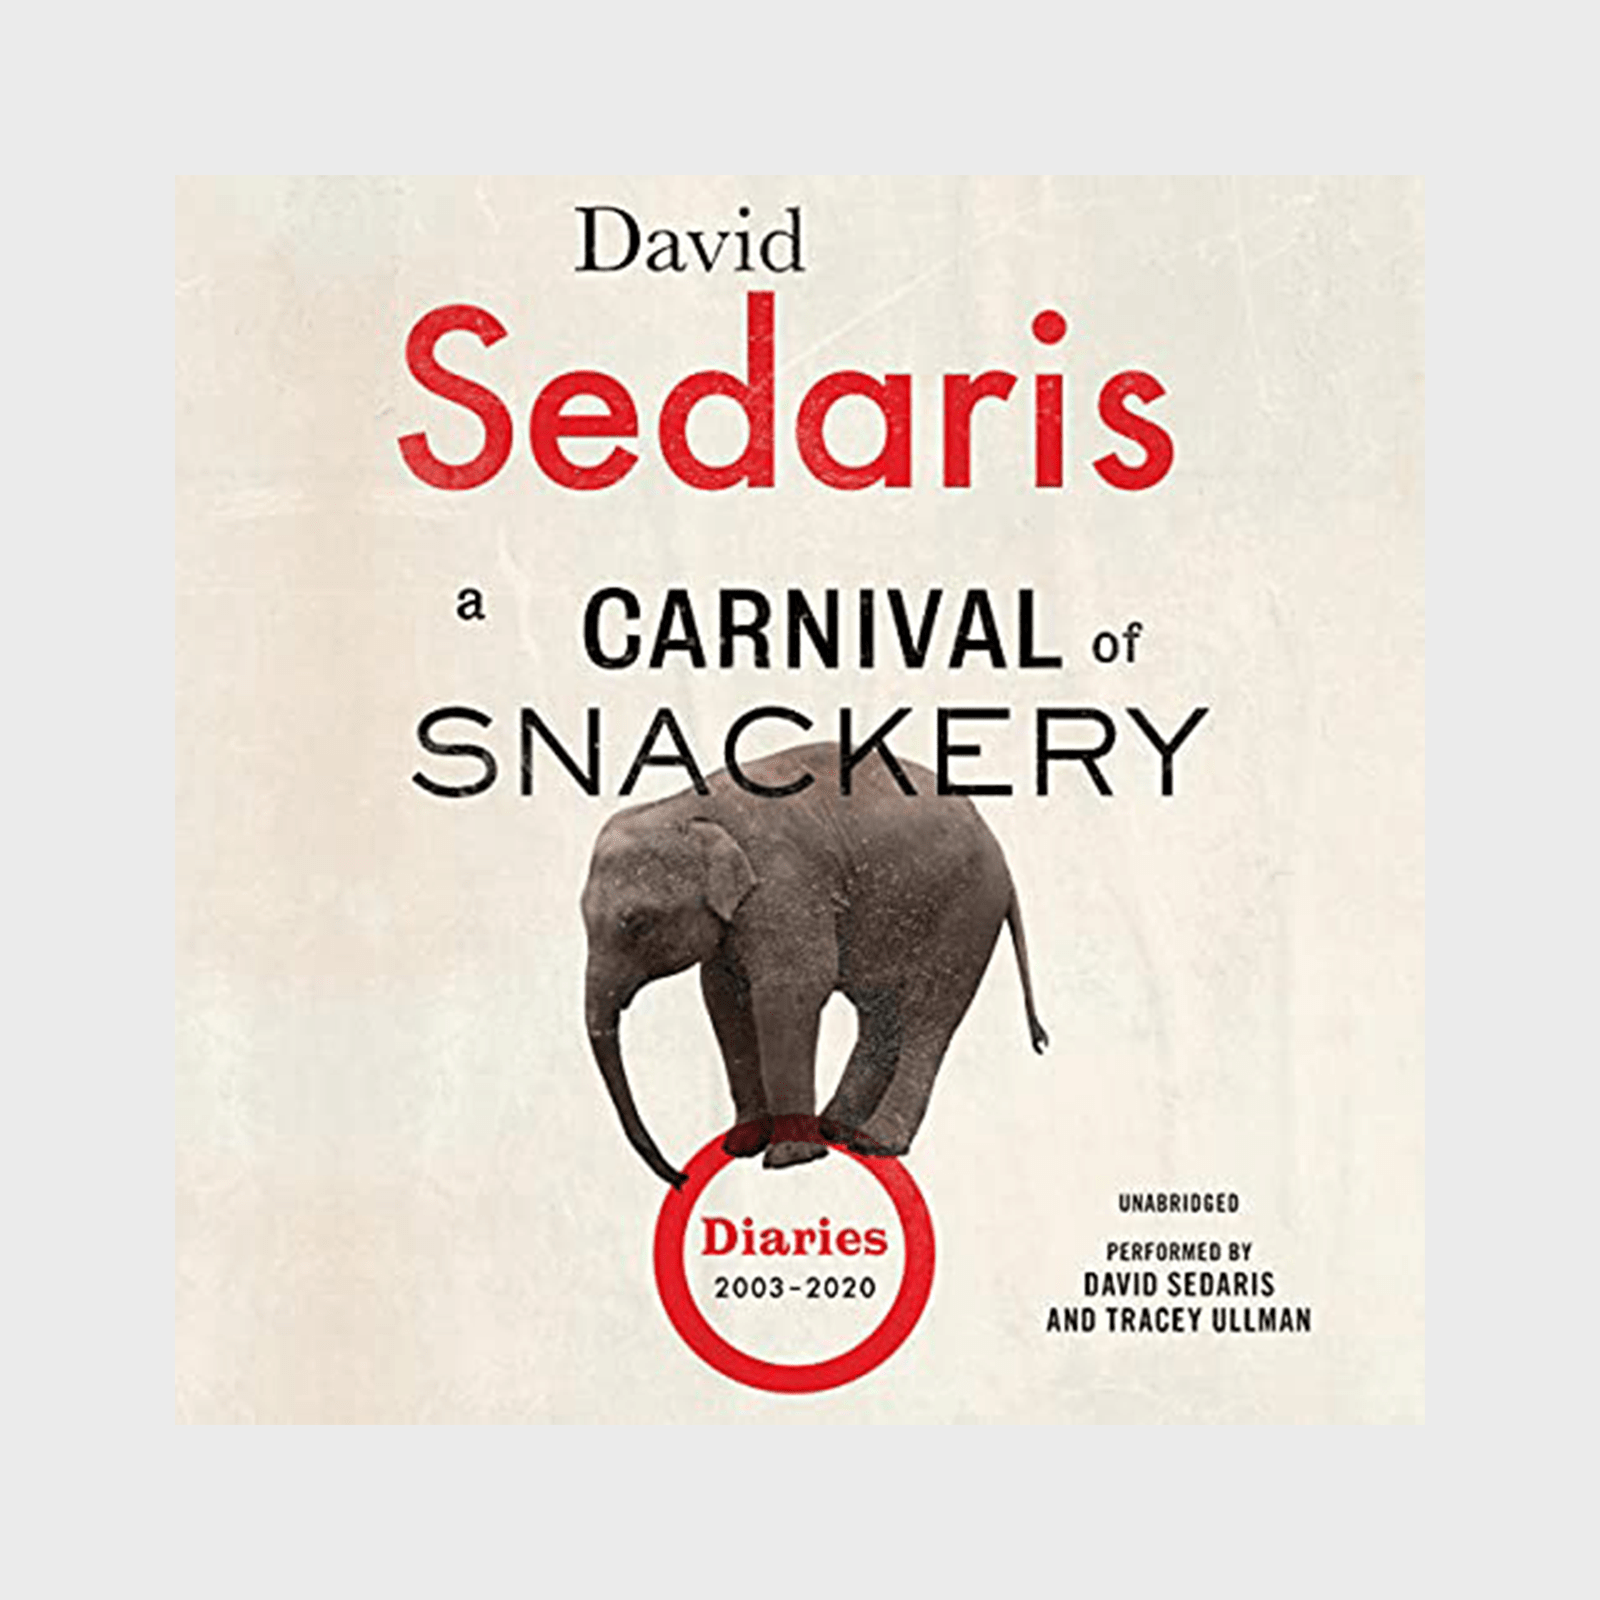 <h3><strong><em>A Carnival of Snackery</em> by David Sedaris</strong></h3> <p>Let's get snarled in every kind of traffic delay while we listen to these seriously funny diary entries written and read by the deliciously subversive <a href="https://www.amazon.com/Carnival-Snackery-Diaries-2003-2020/dp/B09BBS56KS/" rel="noopener noreferrer">David Sedaris</a>, author of some of the best <a href="https://www.rd.com/list/lgbtq-books/" rel="noopener noreferrer">LGBTQ+ books</a>. He shares his commentary on everything from people-watching to politics, with a generous helping of dirty and dirtier jokes. Funny woman Tracy Ullman joins Sedaris in narrating this intriguing and often hilarious collection of anecdotes and observations.</p> <p class="listicle-page__cta-button-shop"><a class="shop-btn" href="https://www.amazon.com/Carnival-Snackery-Diaries-2003-2020/dp/B09BBS56KS/">Shop Now</a></p>